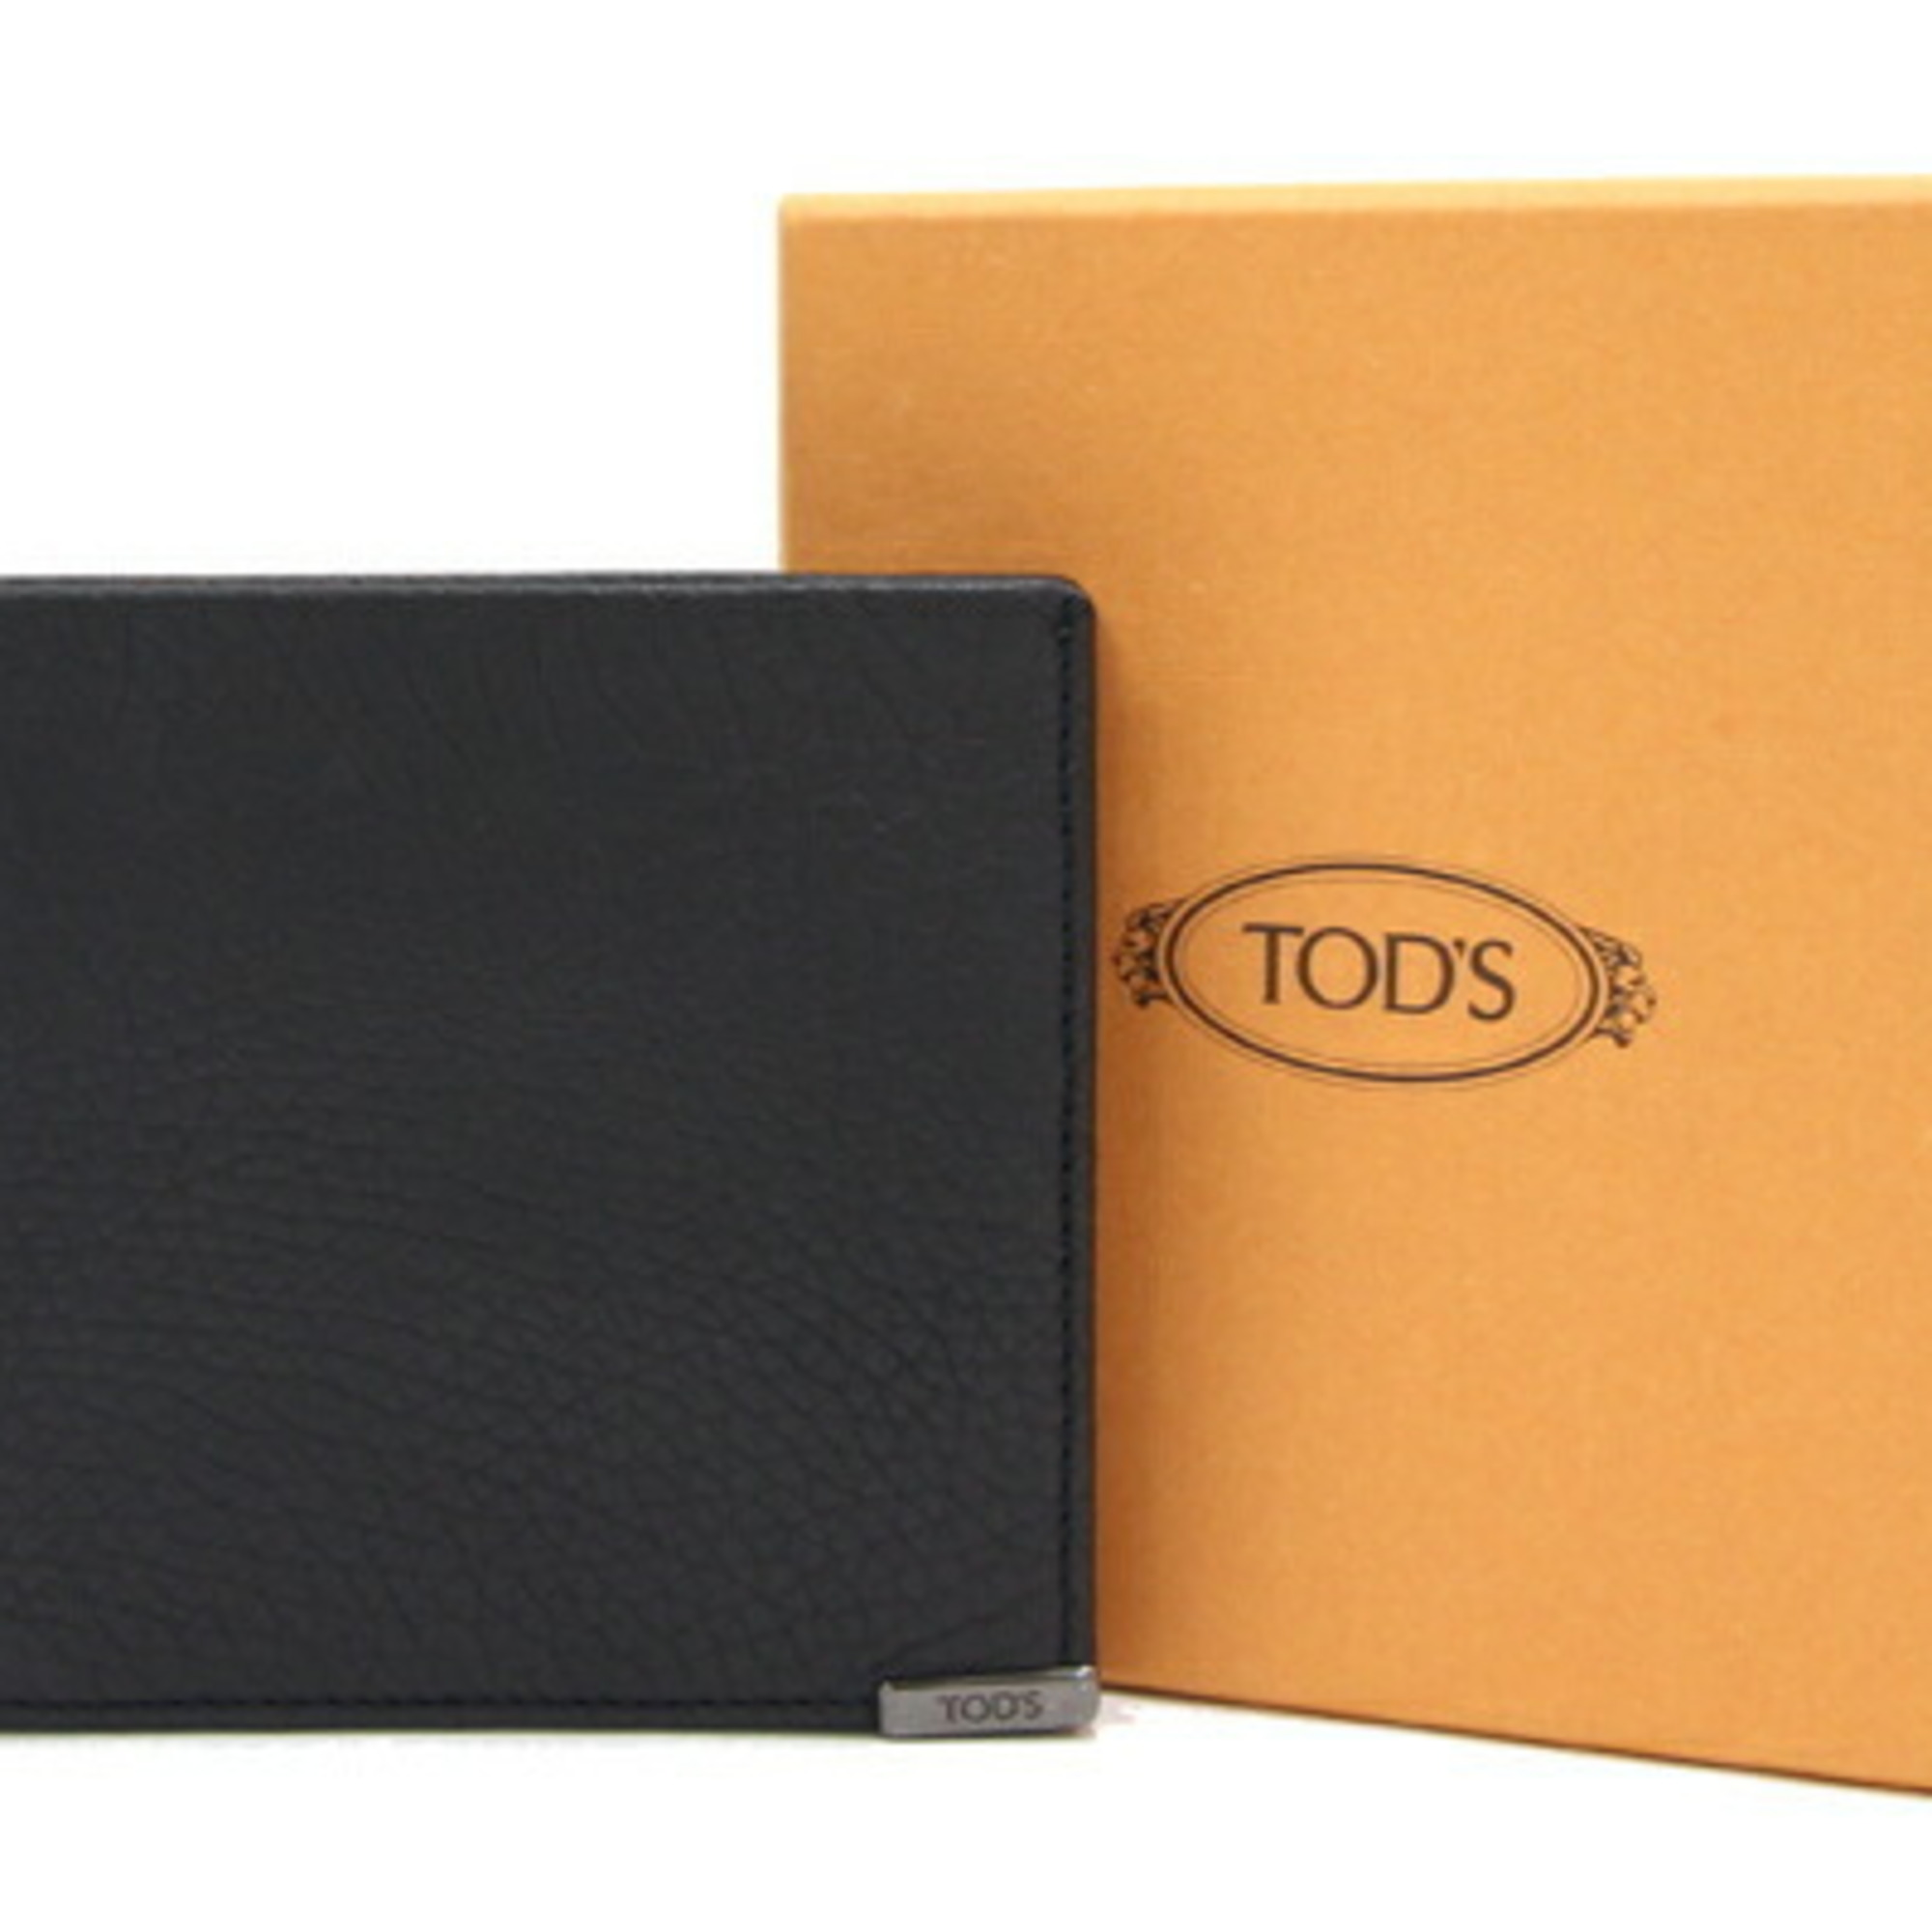 Tod's Bi-fold Wallet Black Leather Compact Men's TOD'S